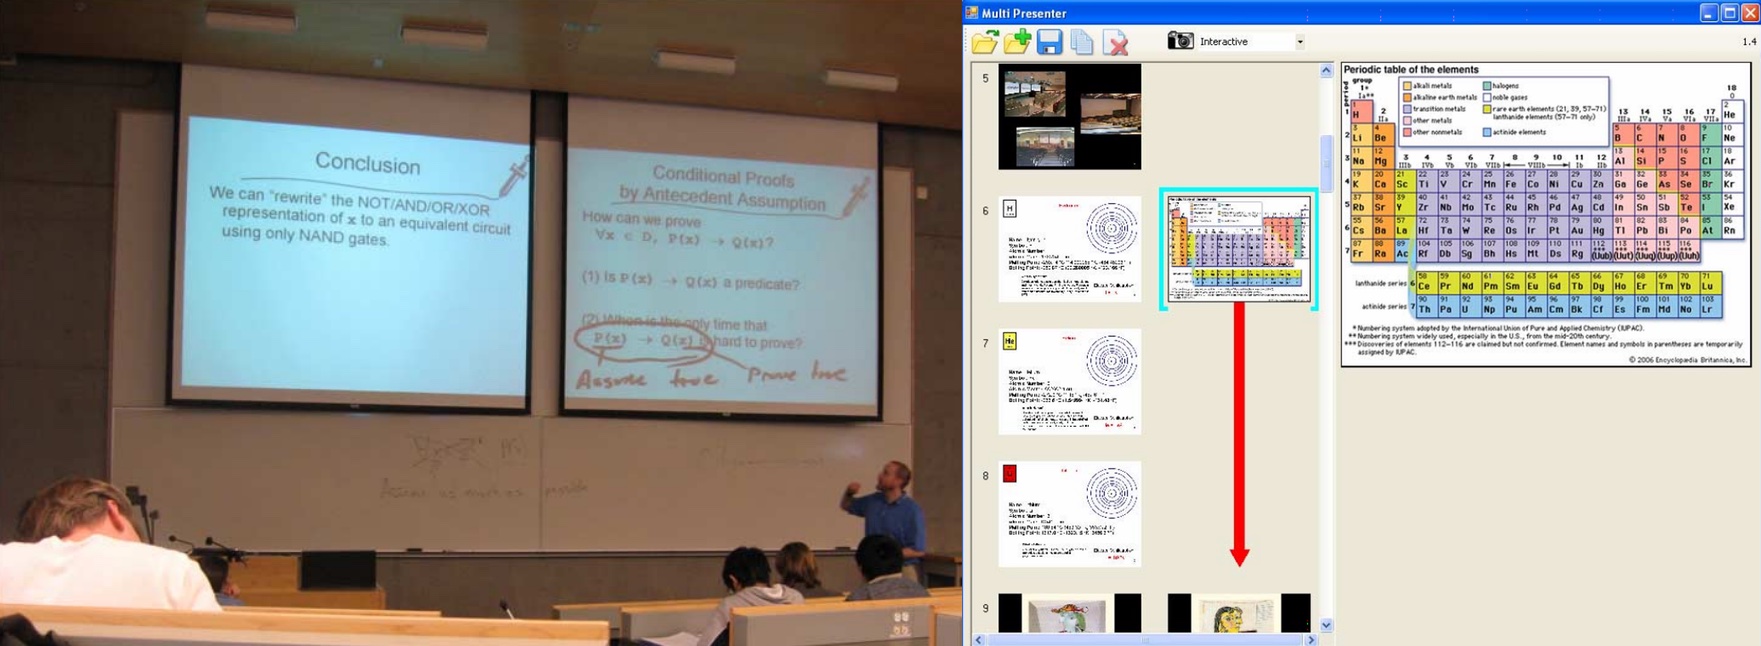 MultiPresenter takes advantage of lecture halls with multiple projectors, allowing them to be used flexibility and independently where appropriate.